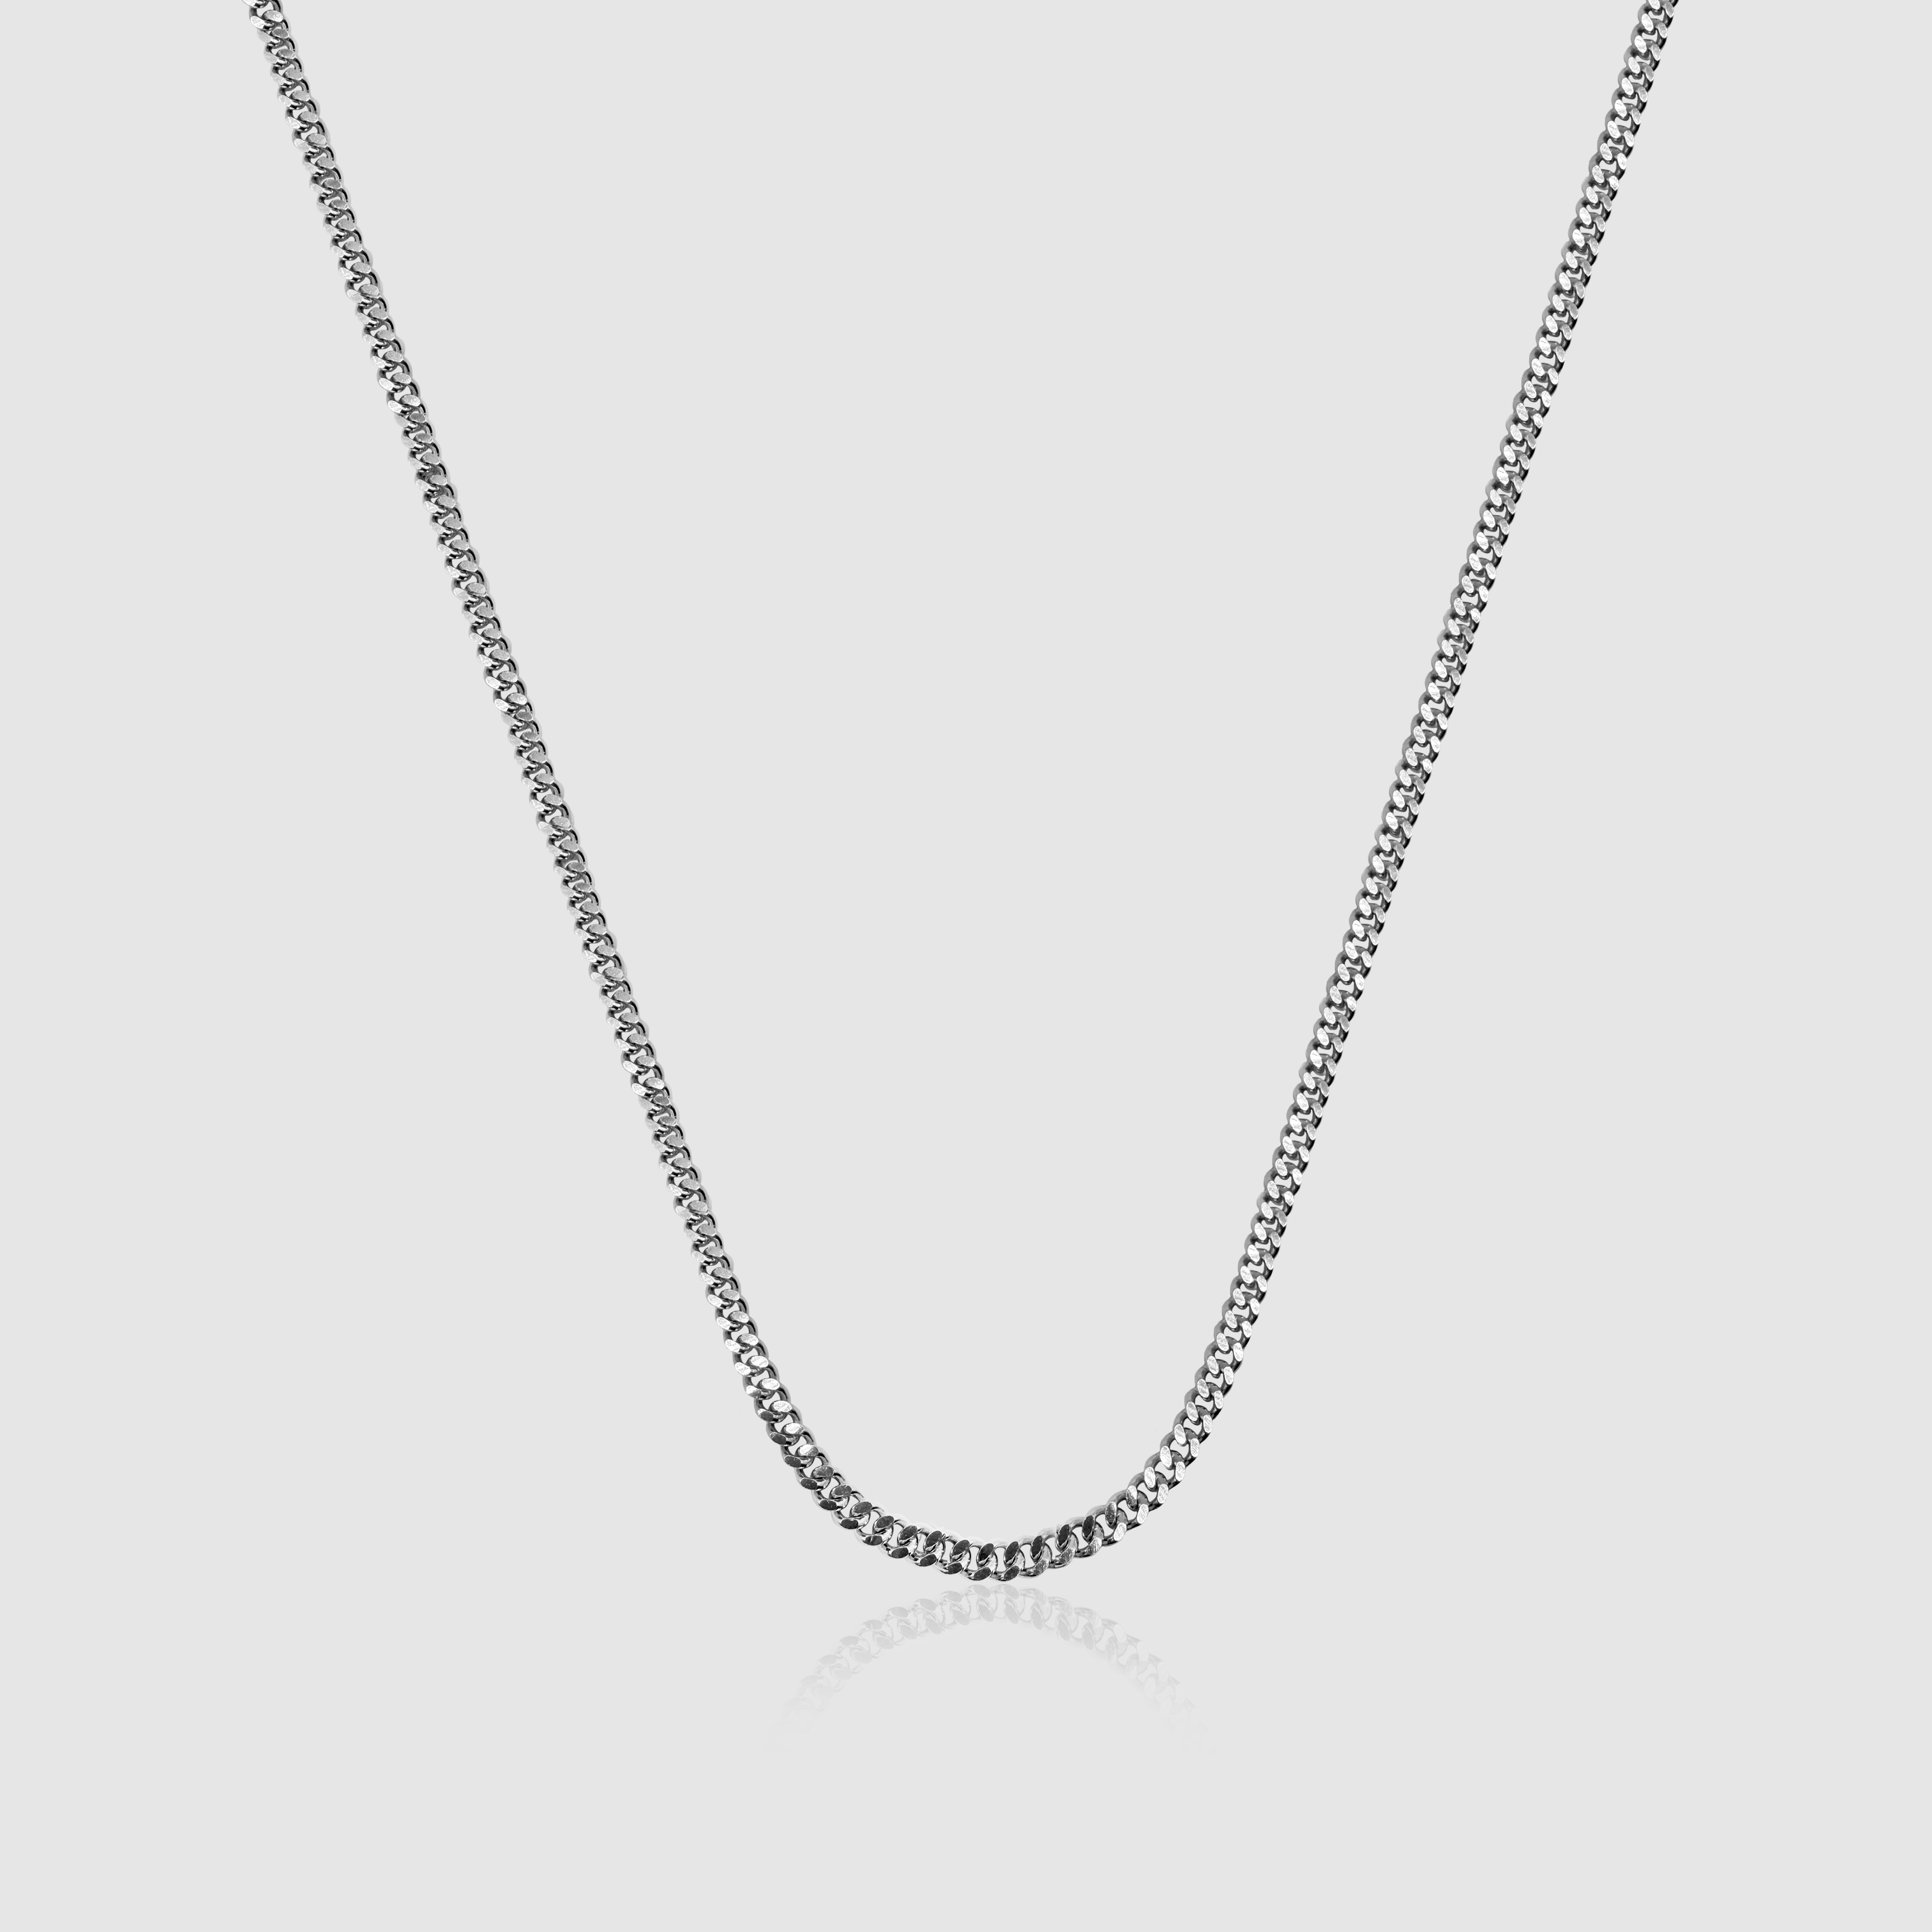 Cubano (argento sterling) 2 mm